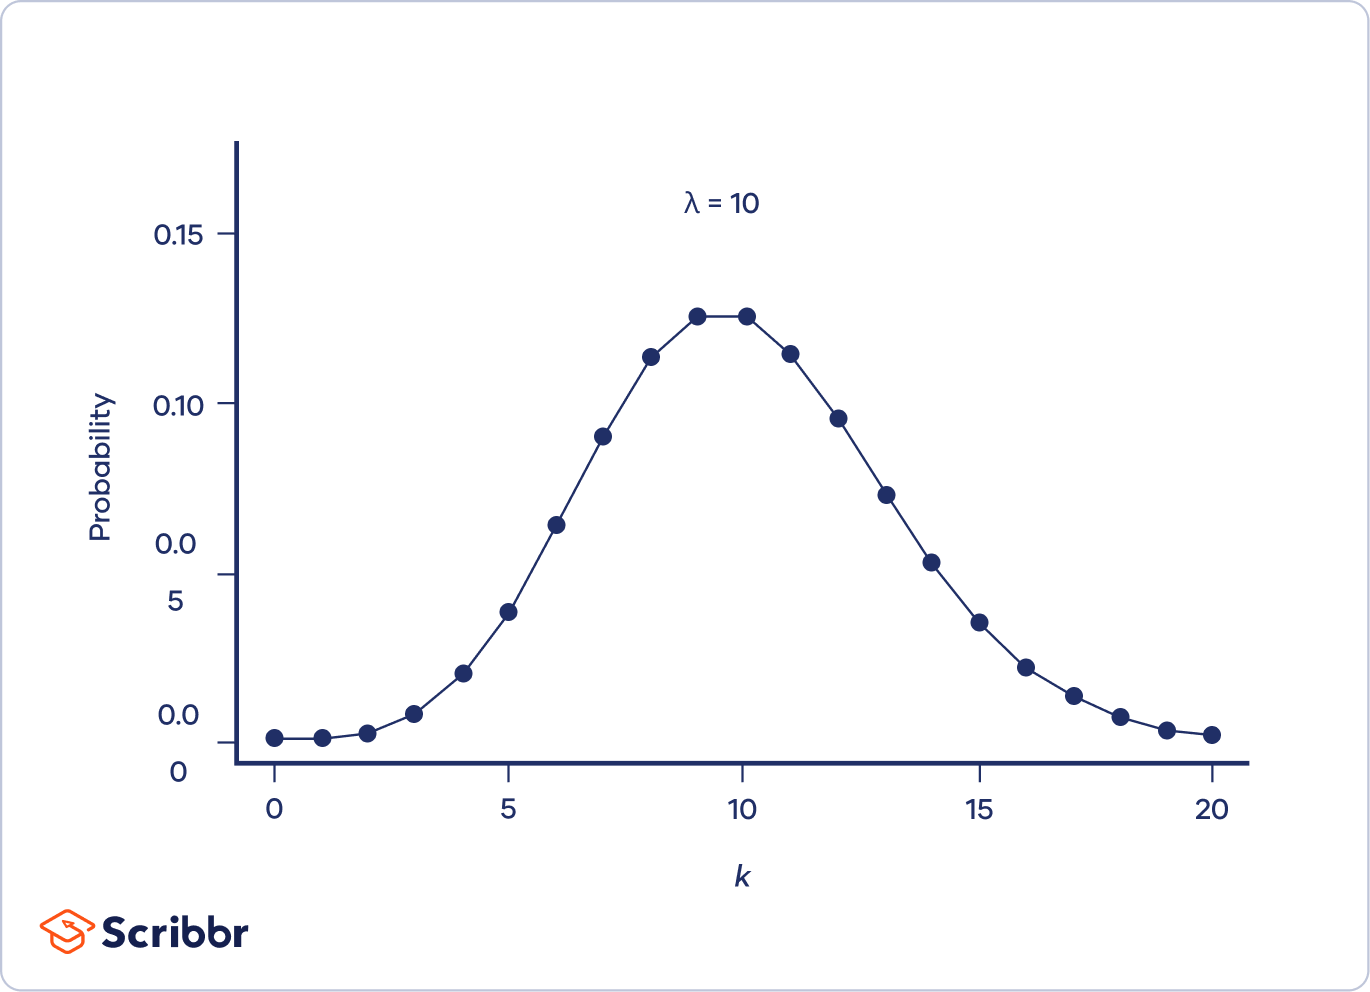 Poisson Distributions  Definition, Formula & Examples